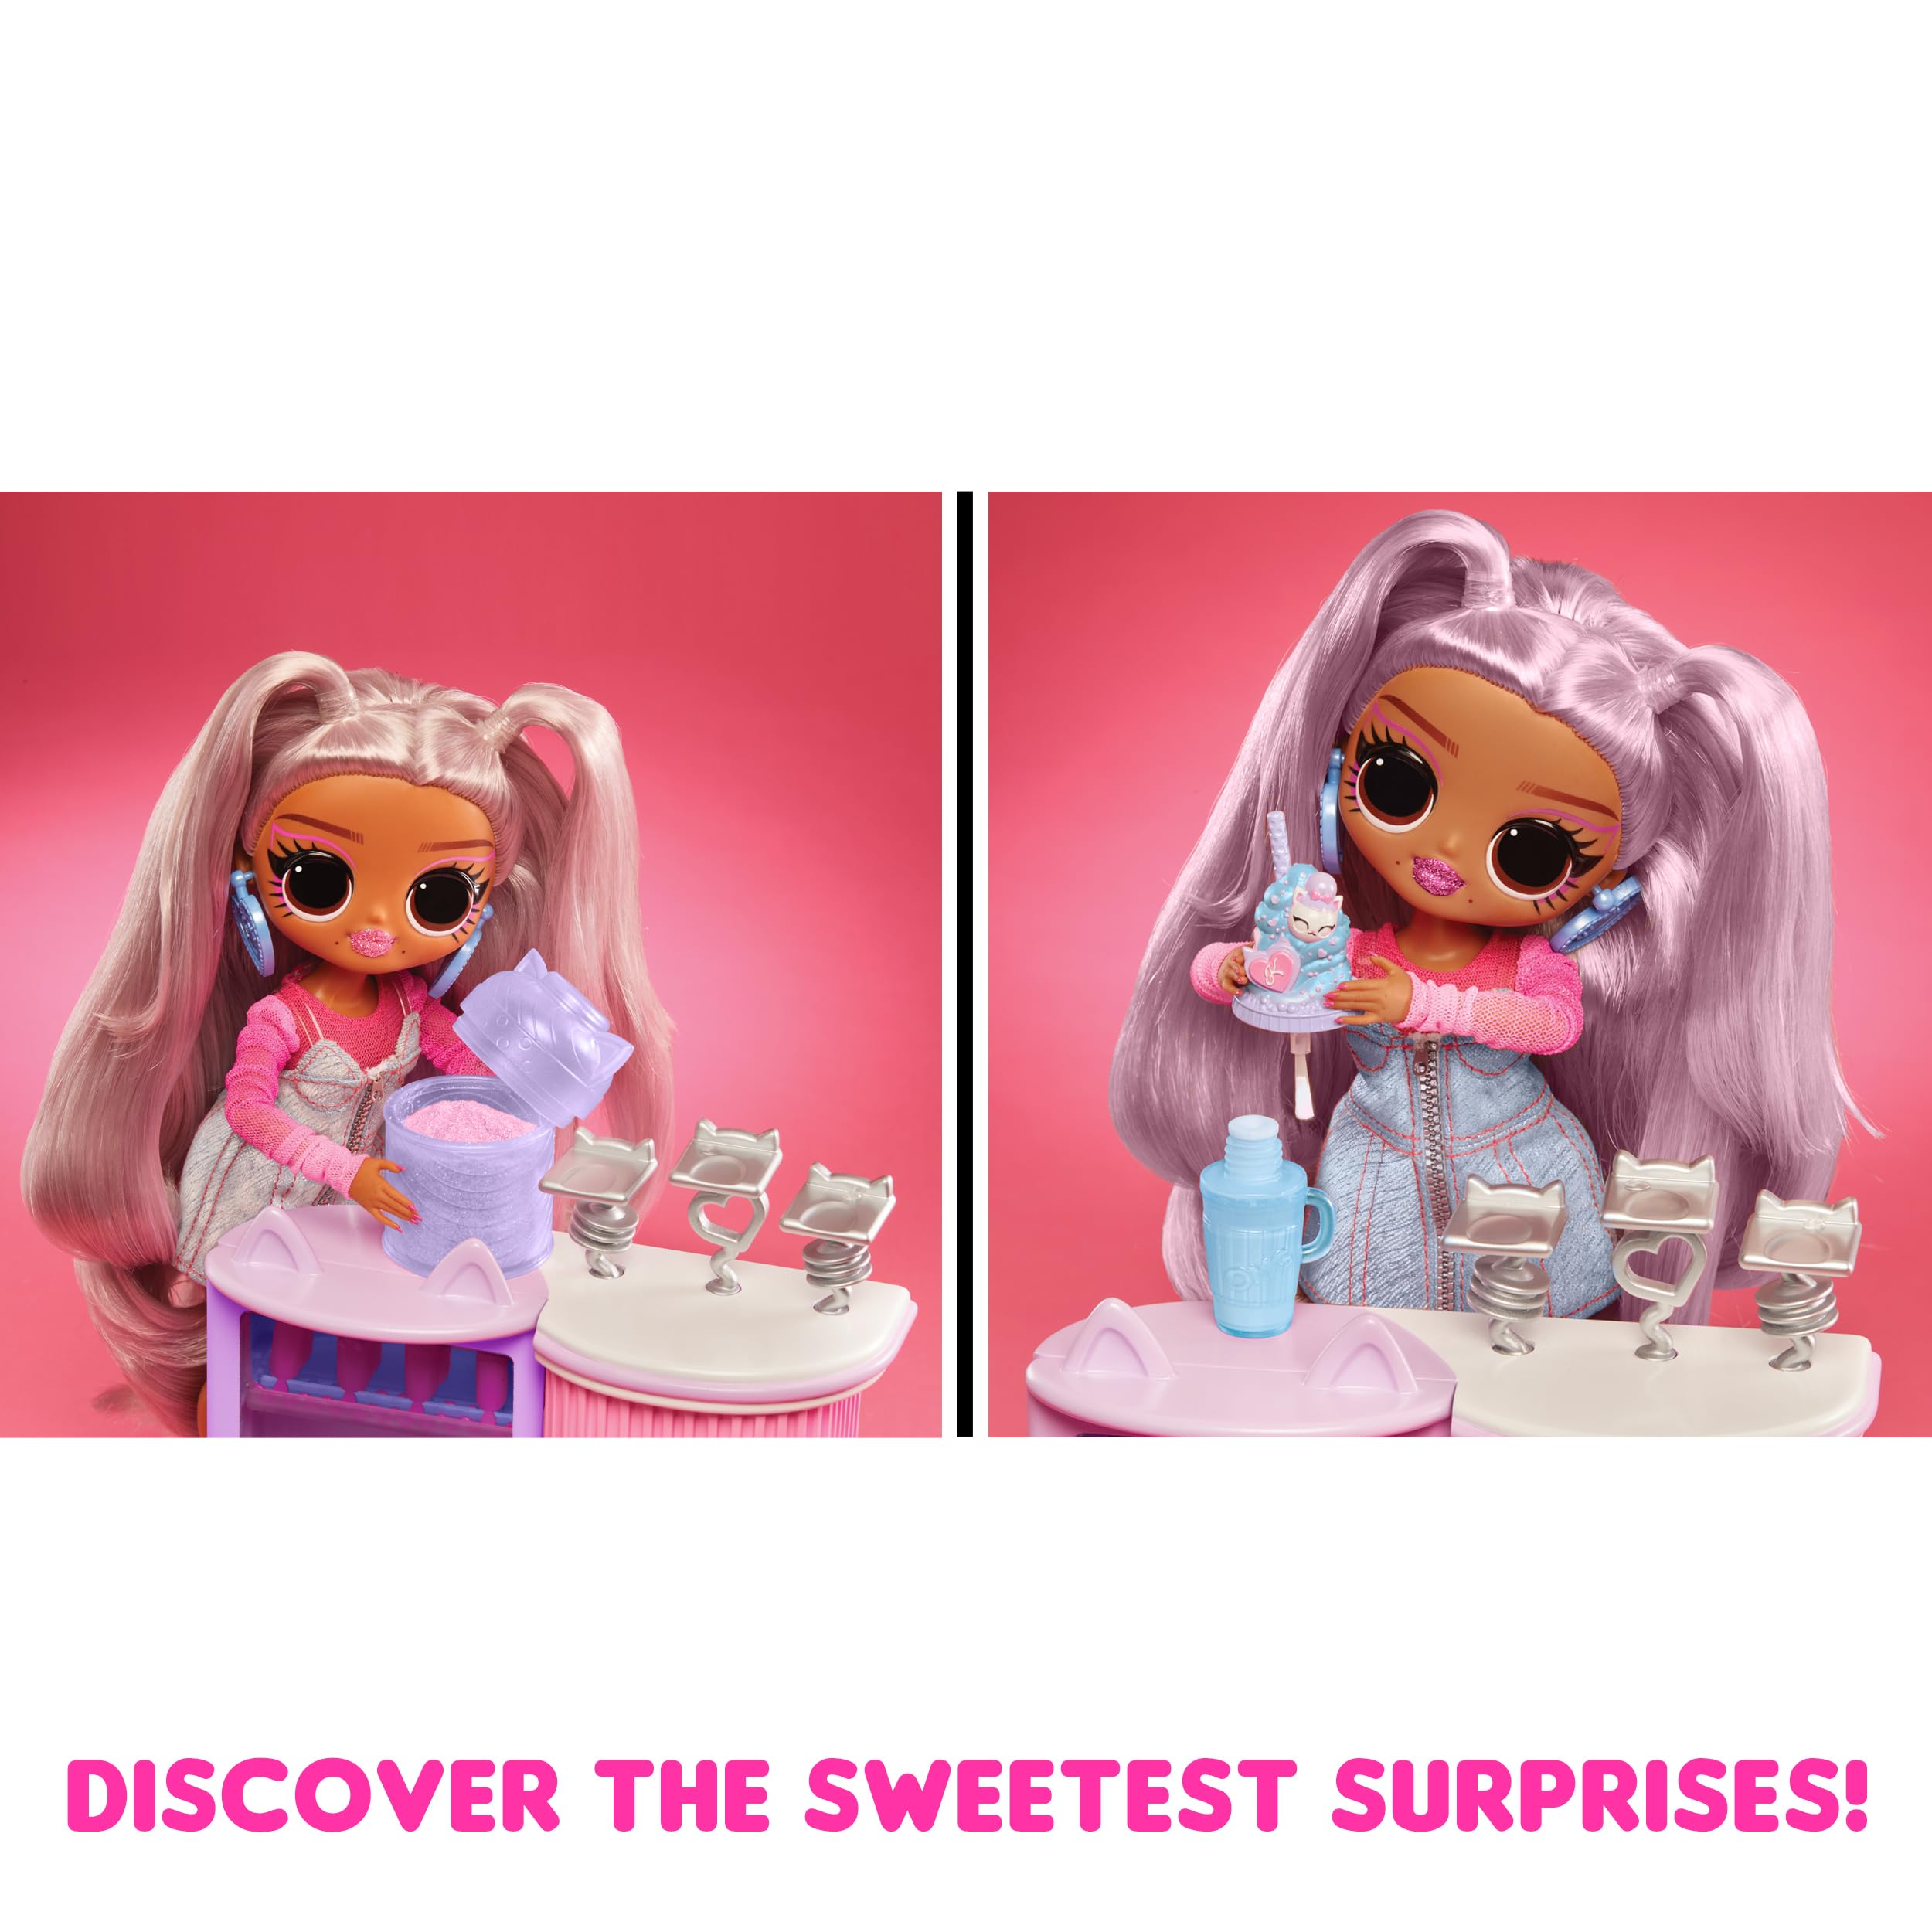 LOL Surprise OMG Sweet Nails – Kitty K Café with 15 Surprises, Including Real Nail Polish, Press On Nails, Sticker Sheets, Glitter, 1 Fashion Doll, and More! – Great Gift for Kids Ages 4+